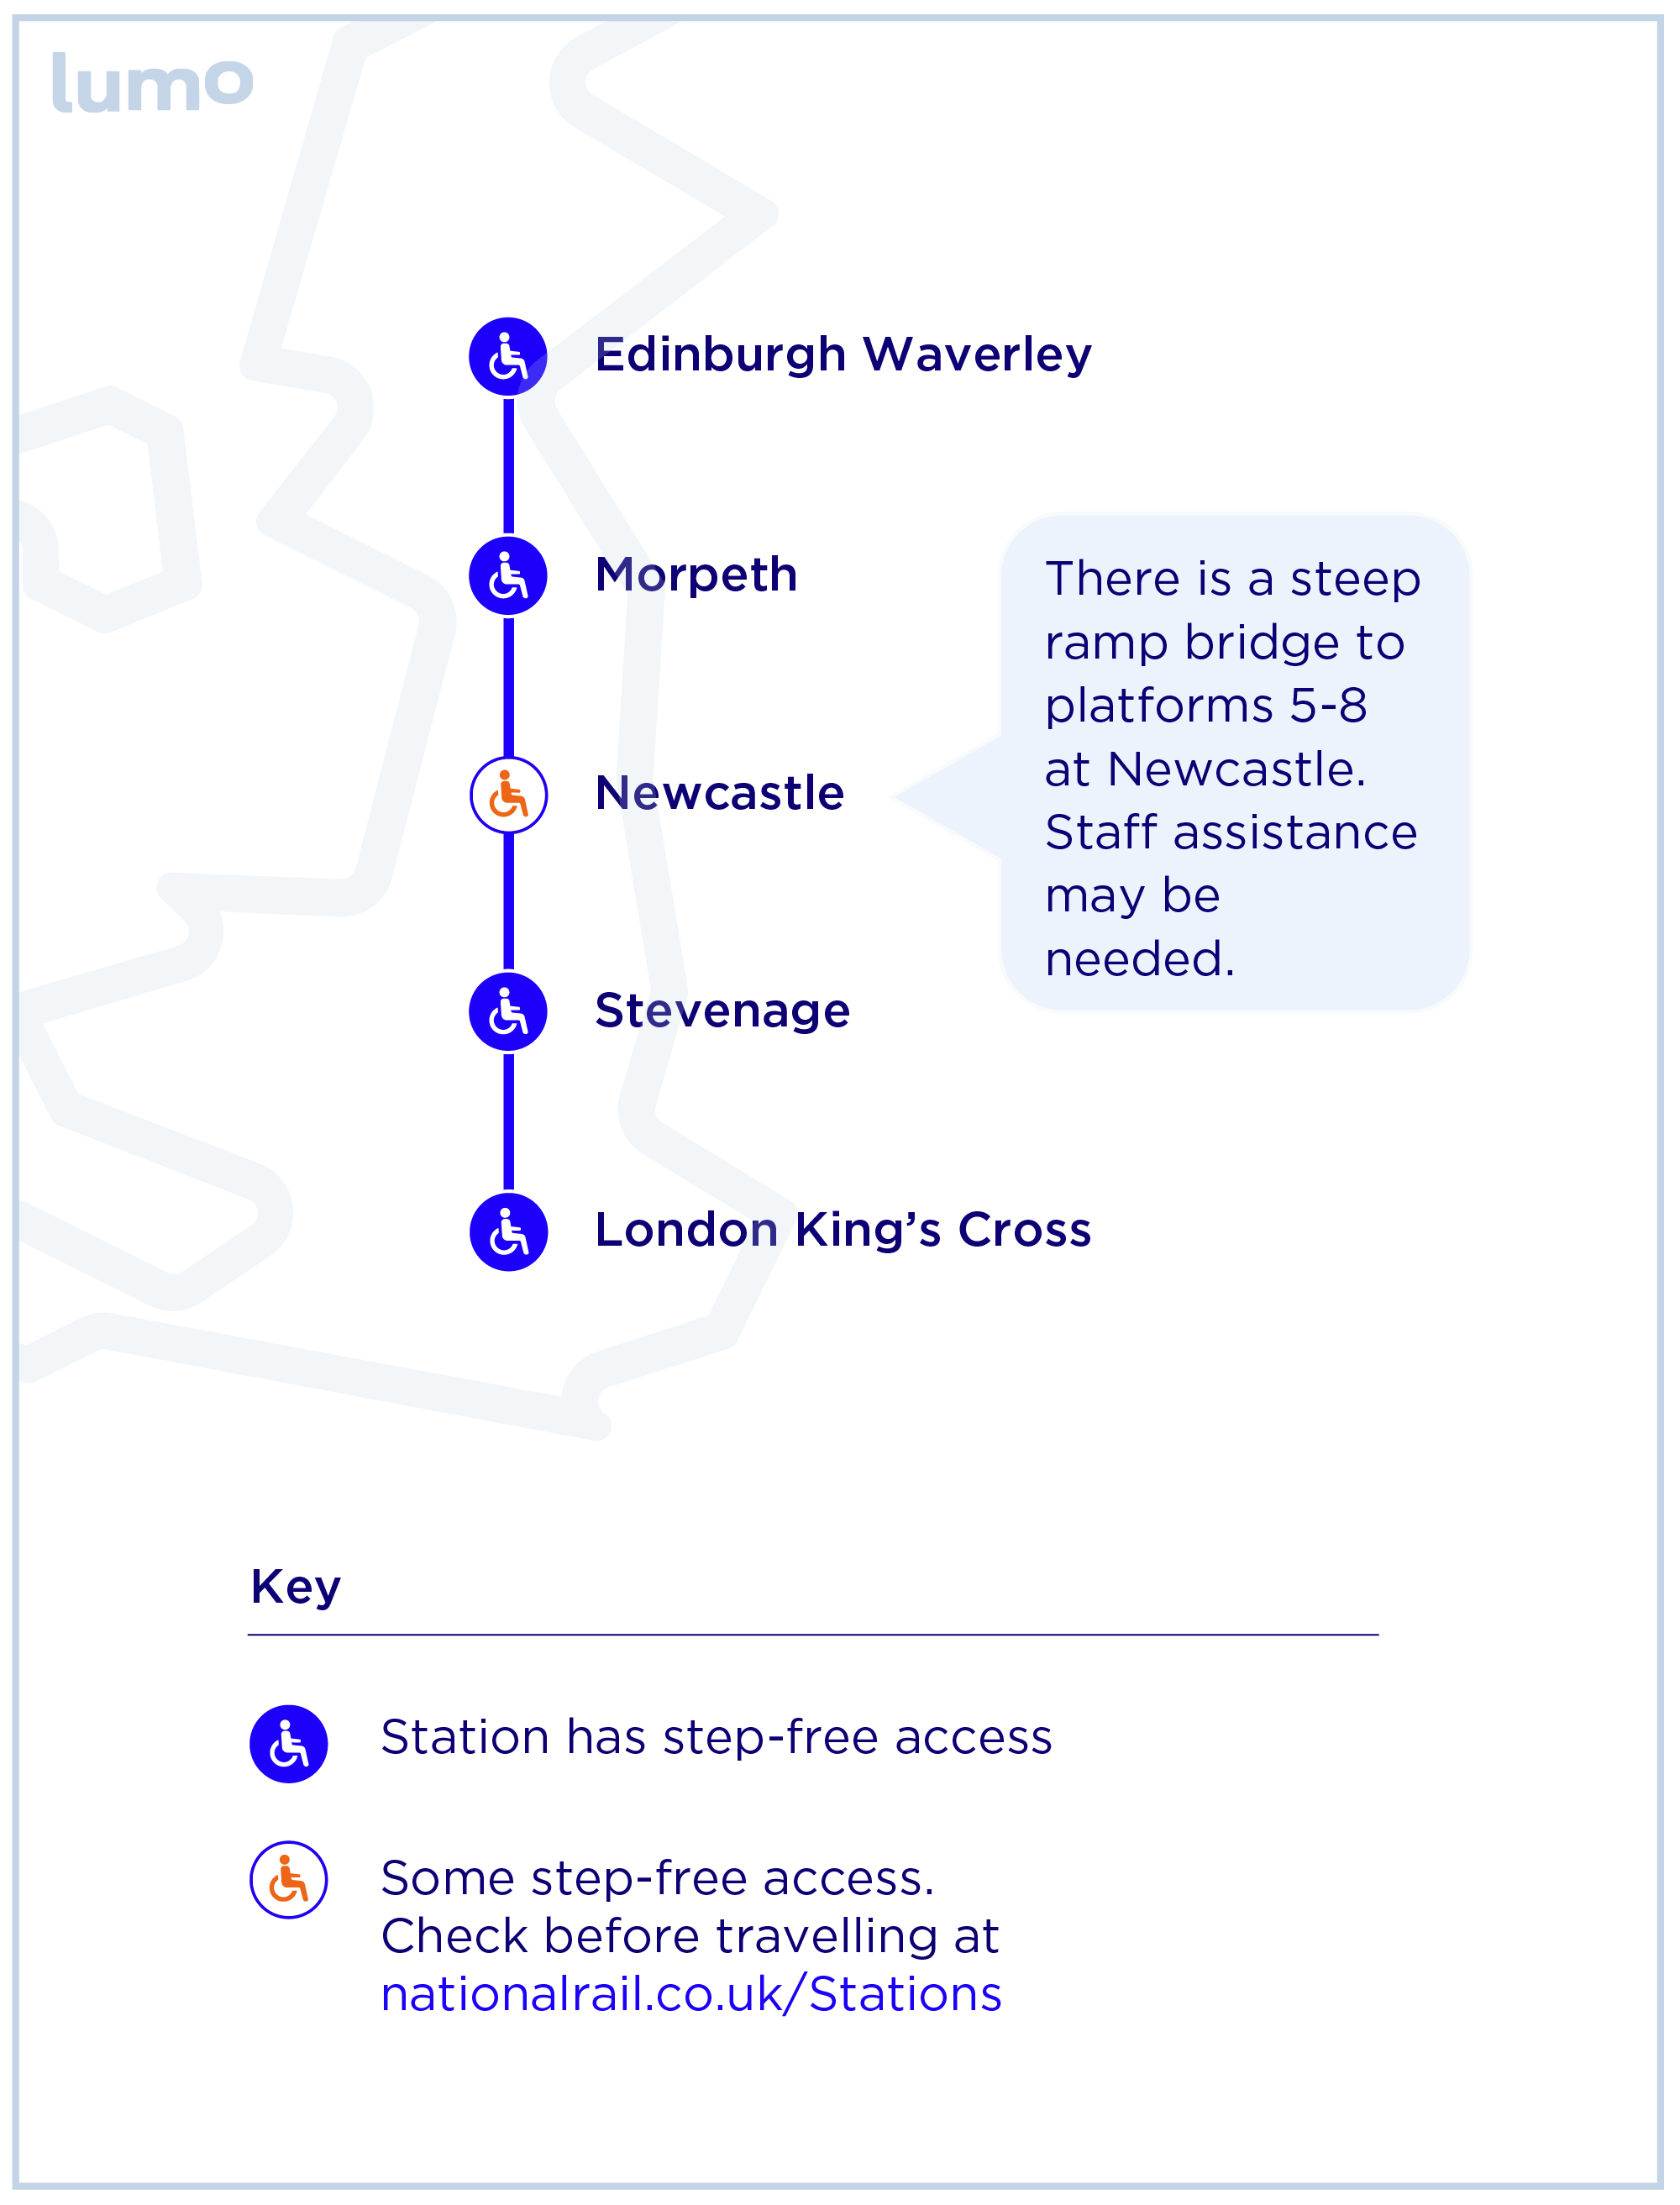 Lumo Route map: Edinburgh, Morpeth, Newcastle, Stevenage, London Kings Cross. At Newcastle there is a steep ramp bridge to platforms 5-8, staff assistance may be needed. All the other stations have step free access